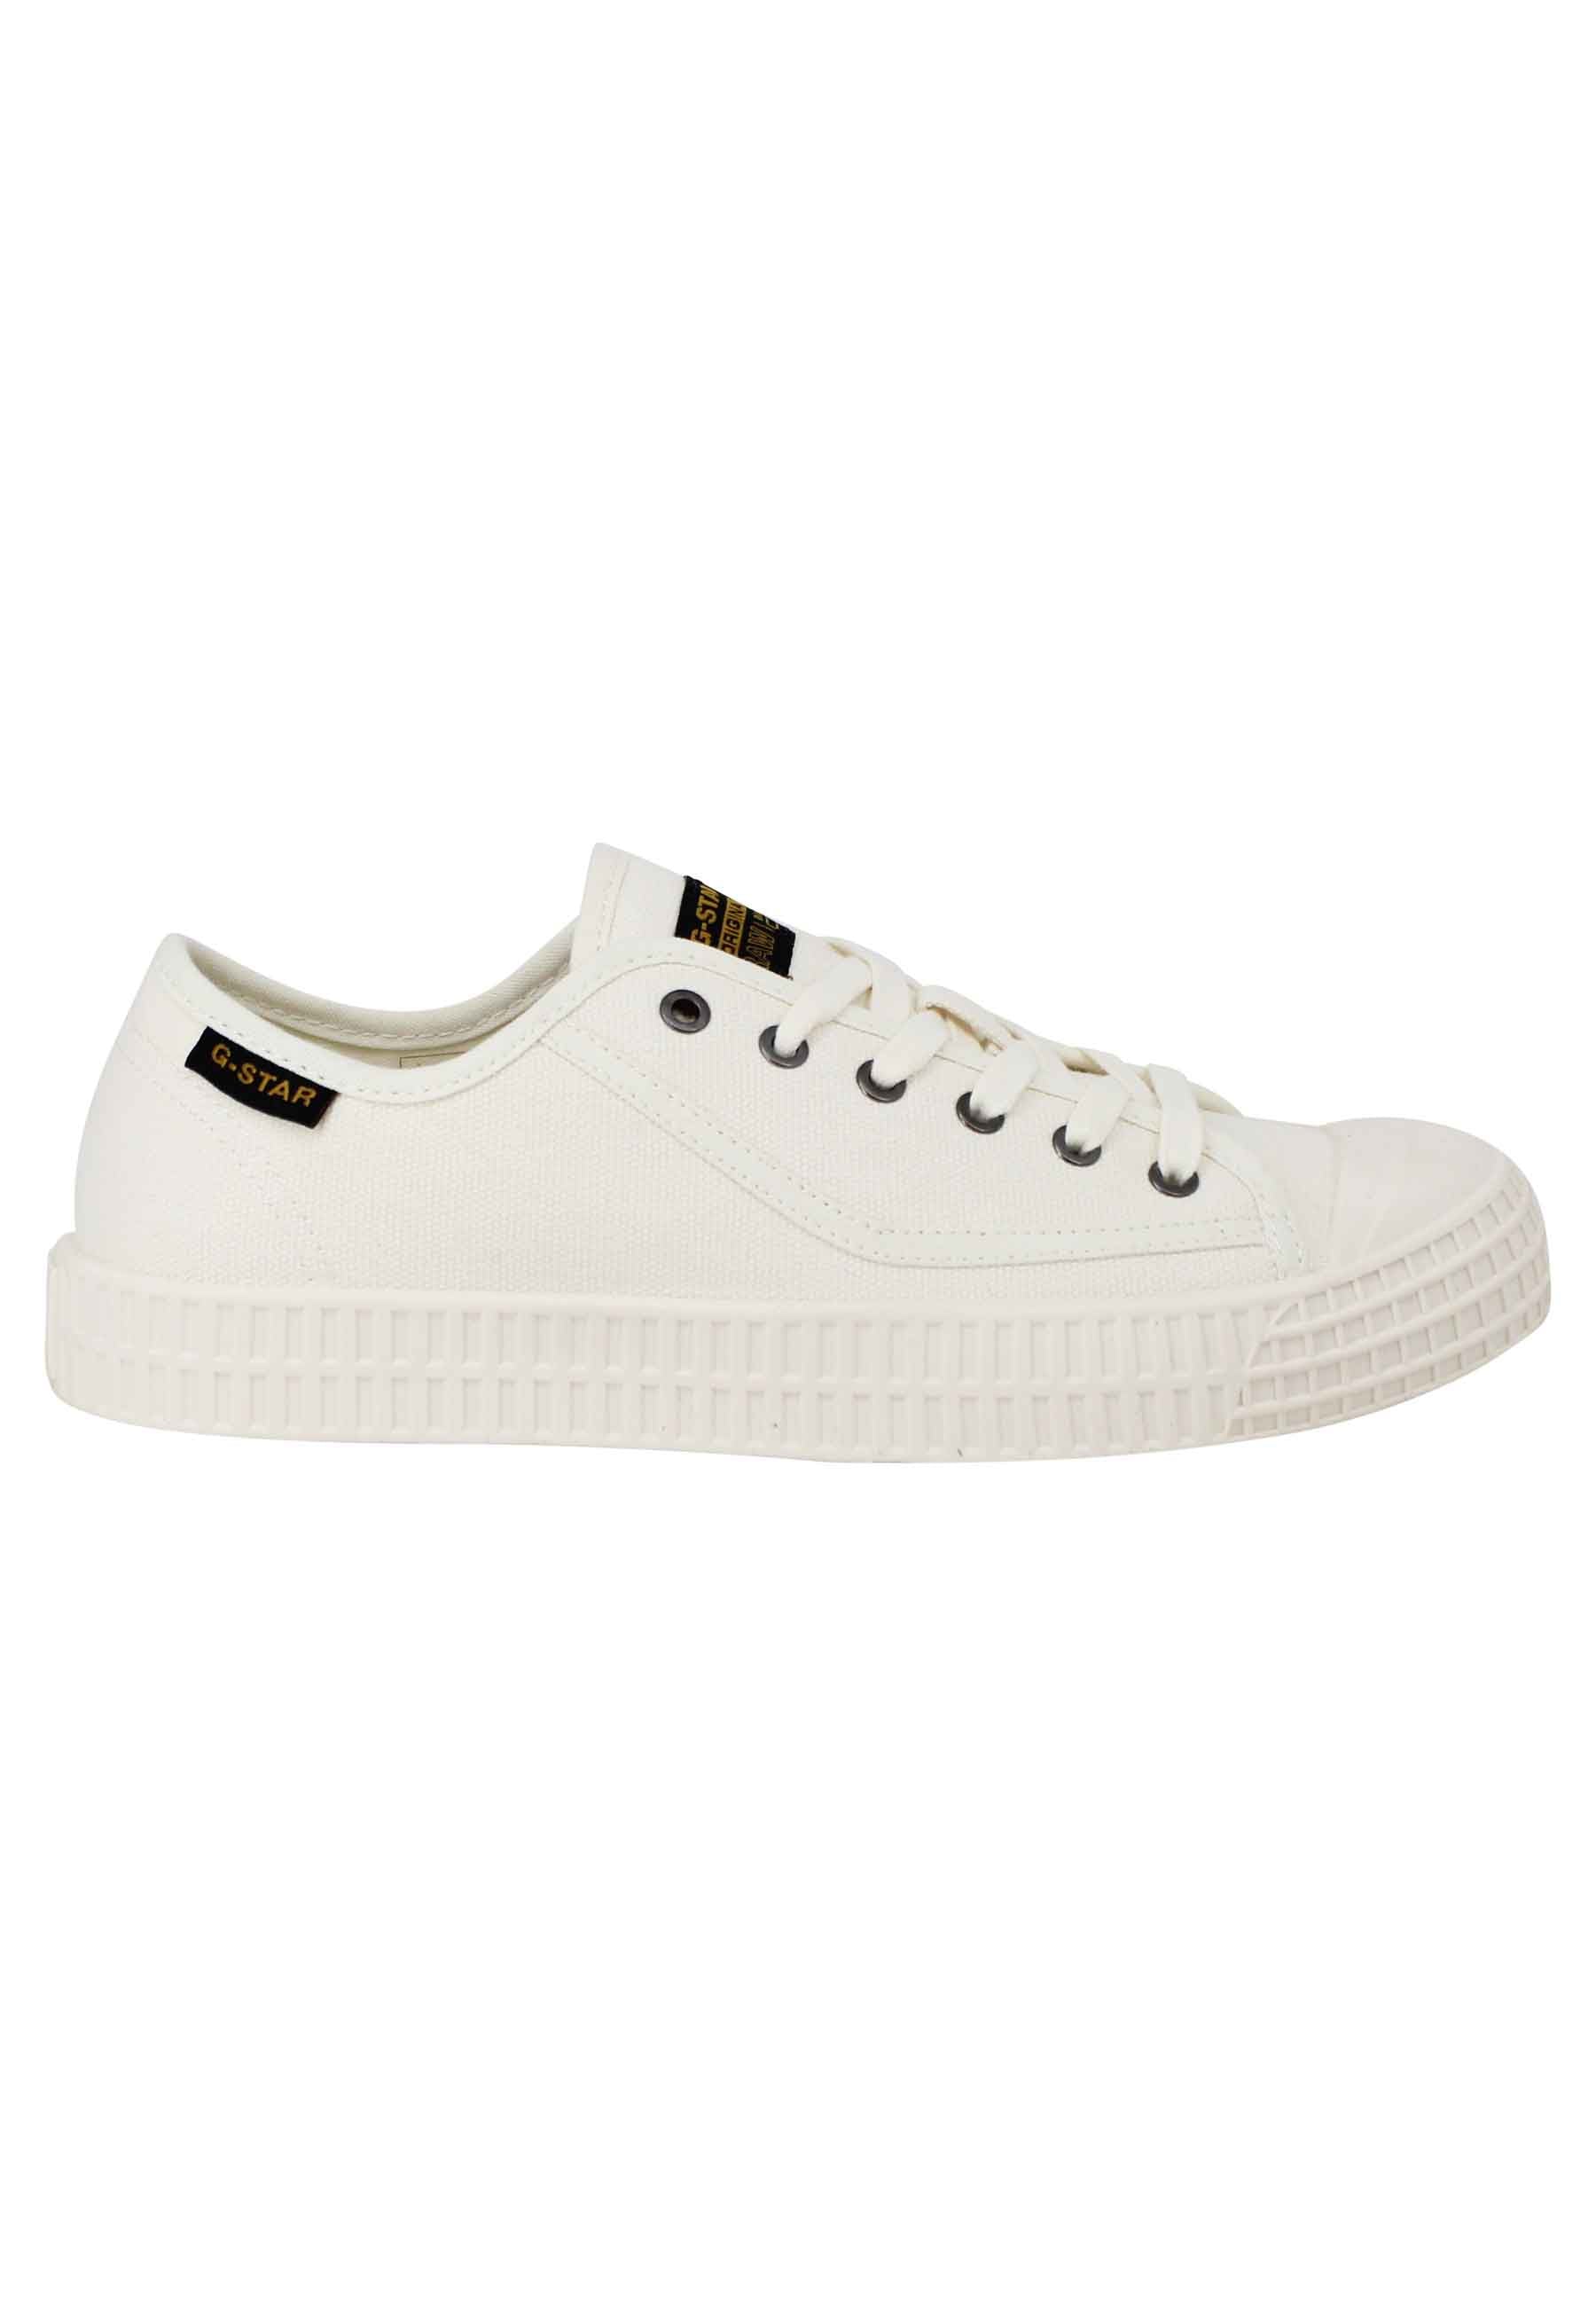 Sneakers uomo Rovulc II in canvas off white